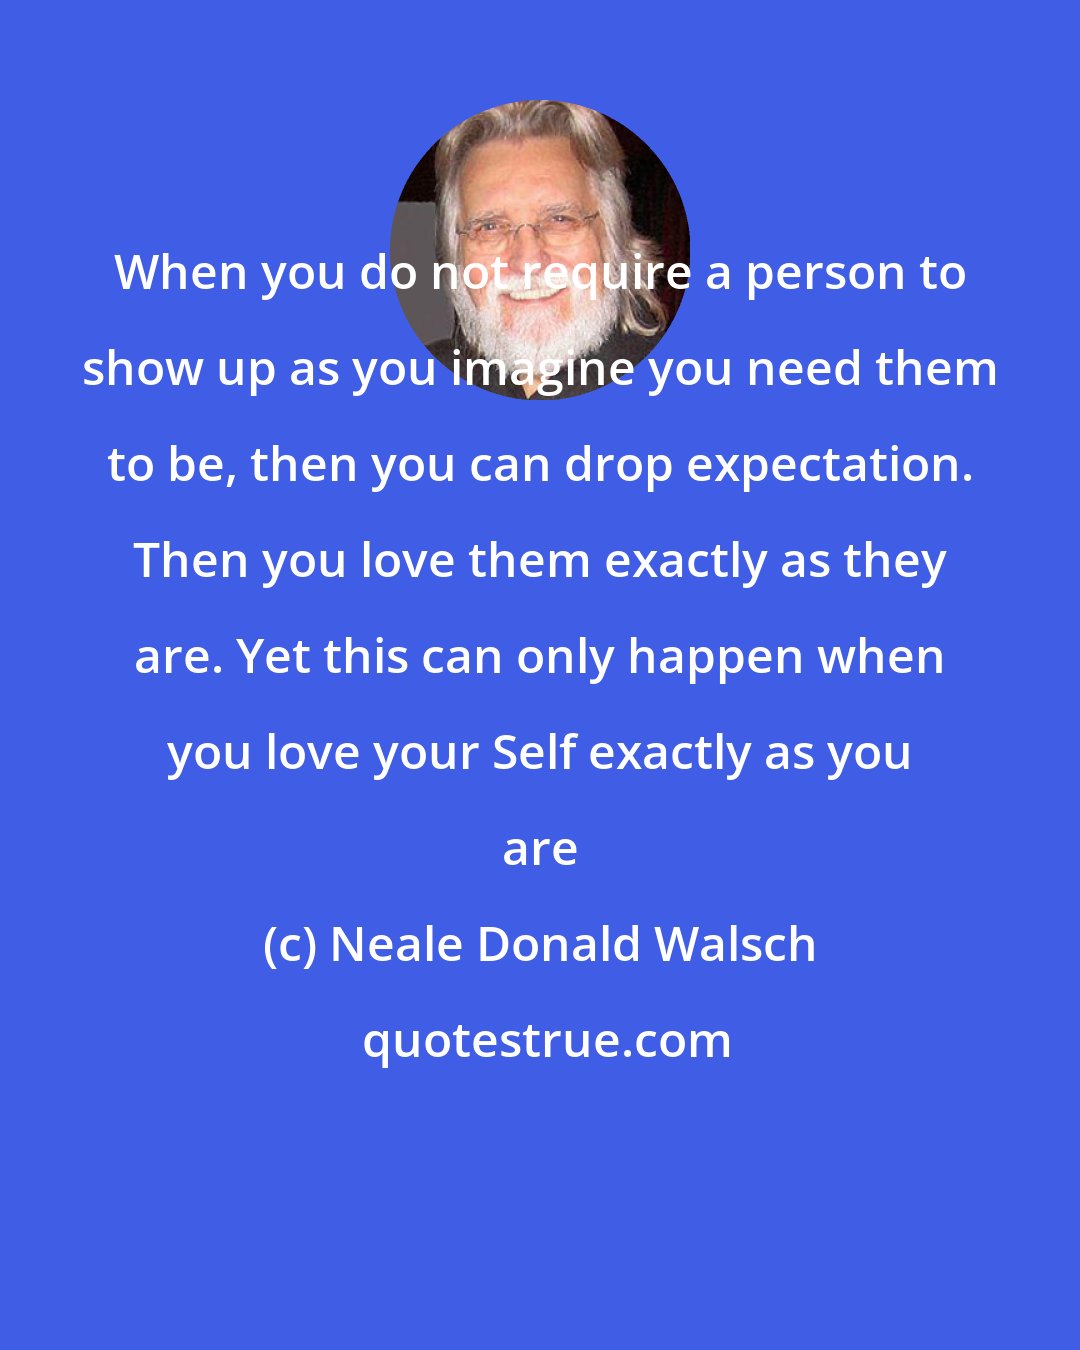 Neale Donald Walsch: When you do not require a person to show up as you imagine you need them to be, then you can drop expectation. Then you love them exactly as they are. Yet this can only happen when you love your Self exactly as you are